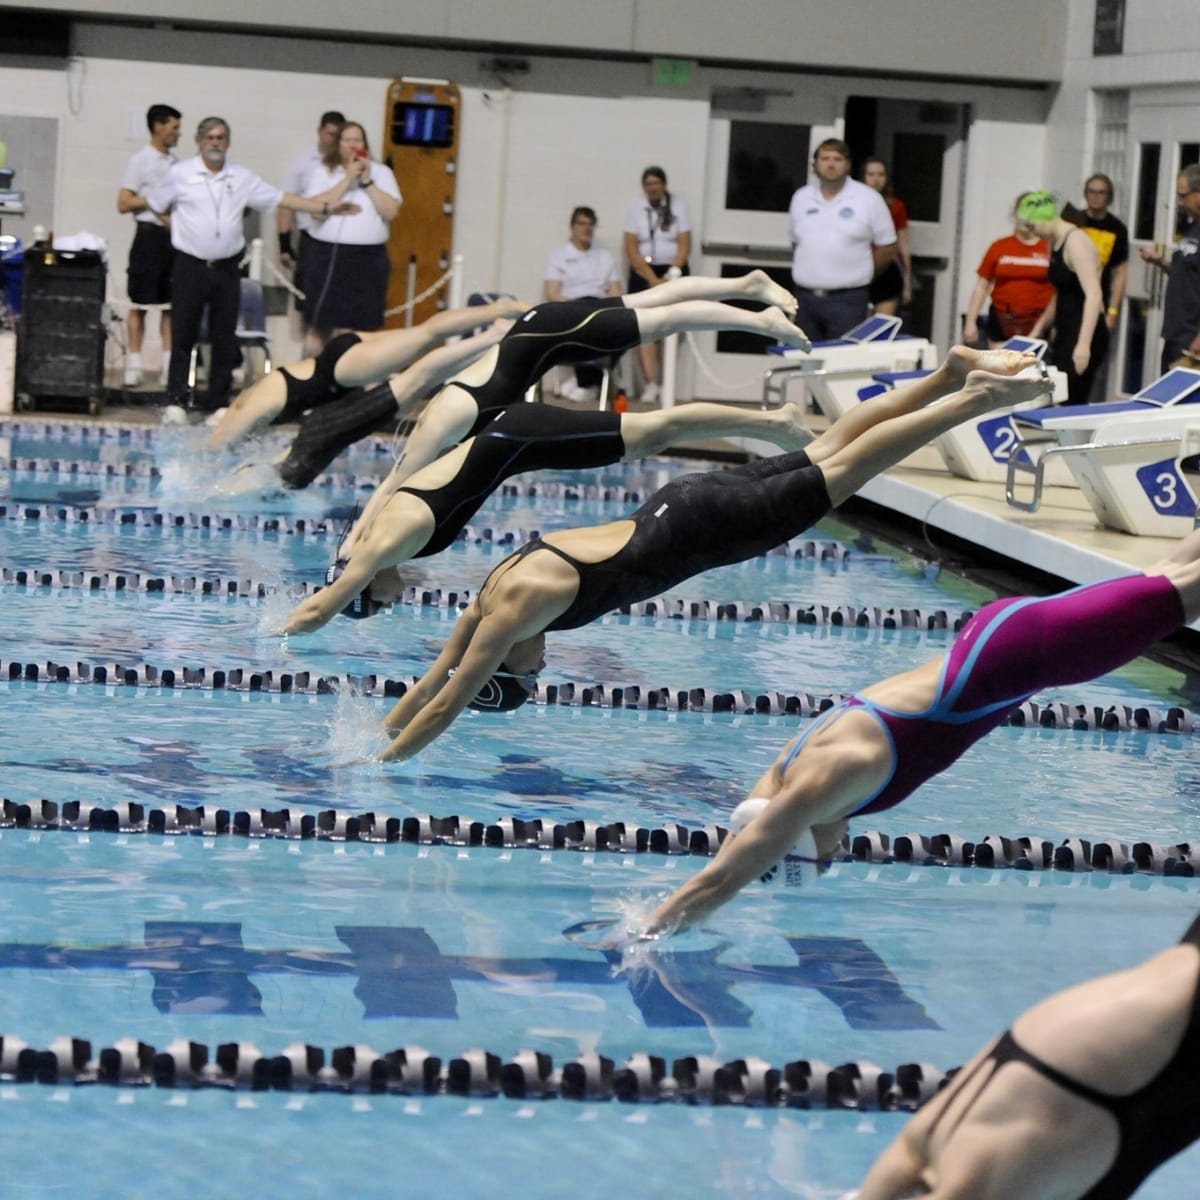 WIAA notebook State girls swimming meet at King County Aquatic Center will likely be held without spectators